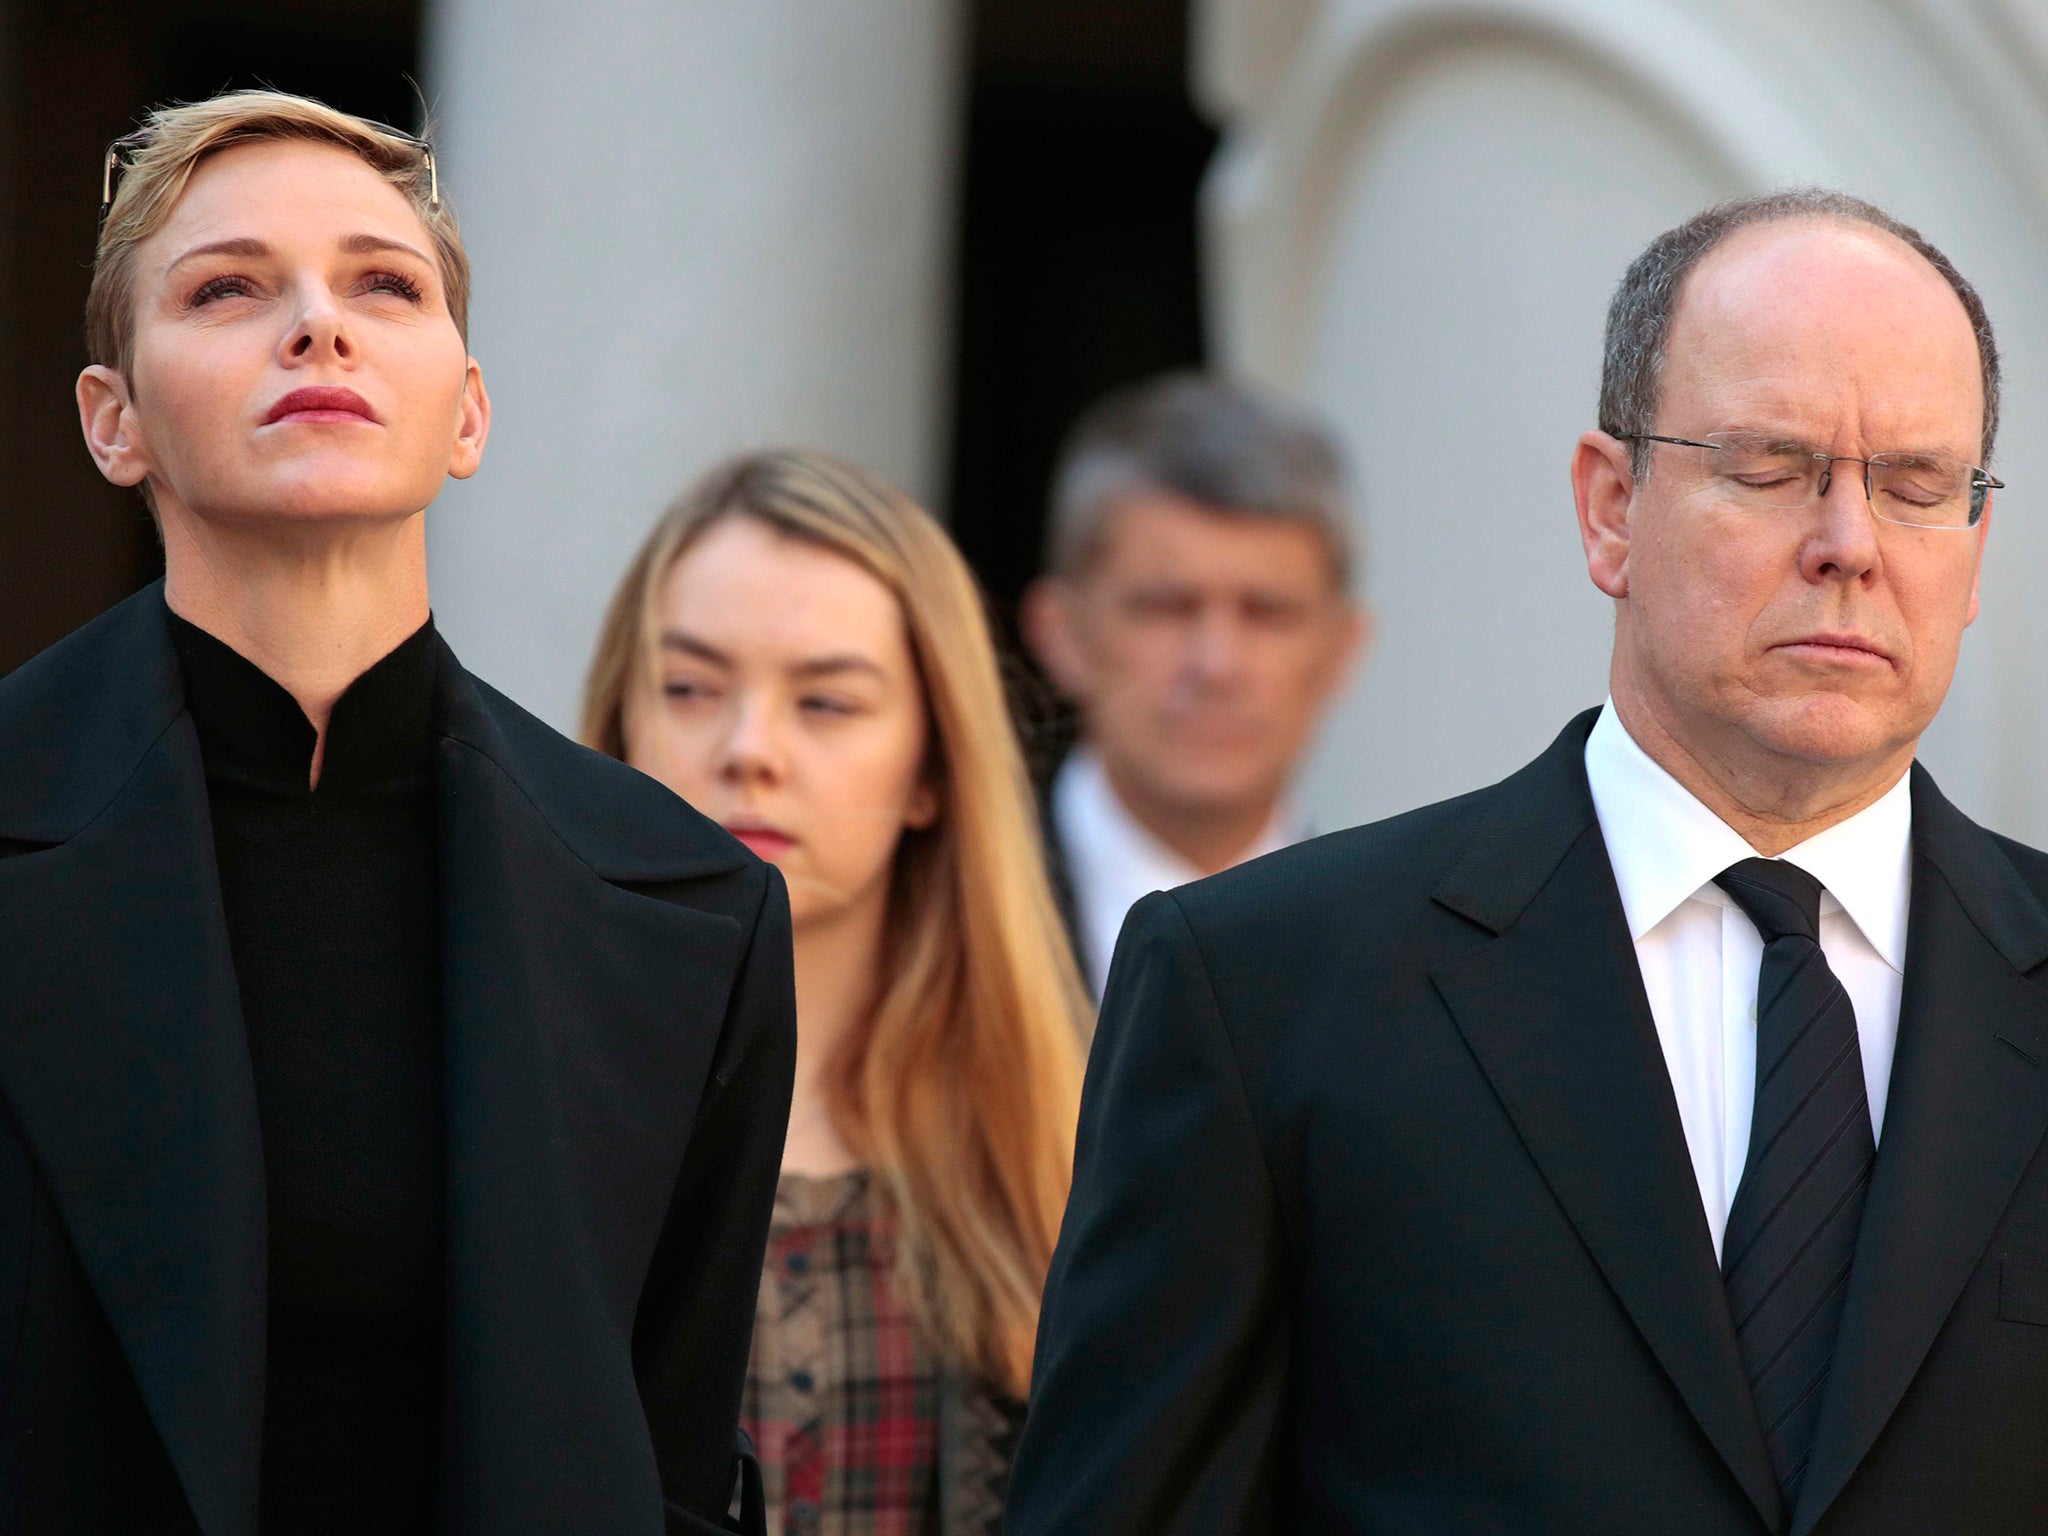 Prince Albert II of Monaco and Princess Charlene observe a minute of silence as they pay tribute to the victims of the Paris attacks, at Monaco Palace